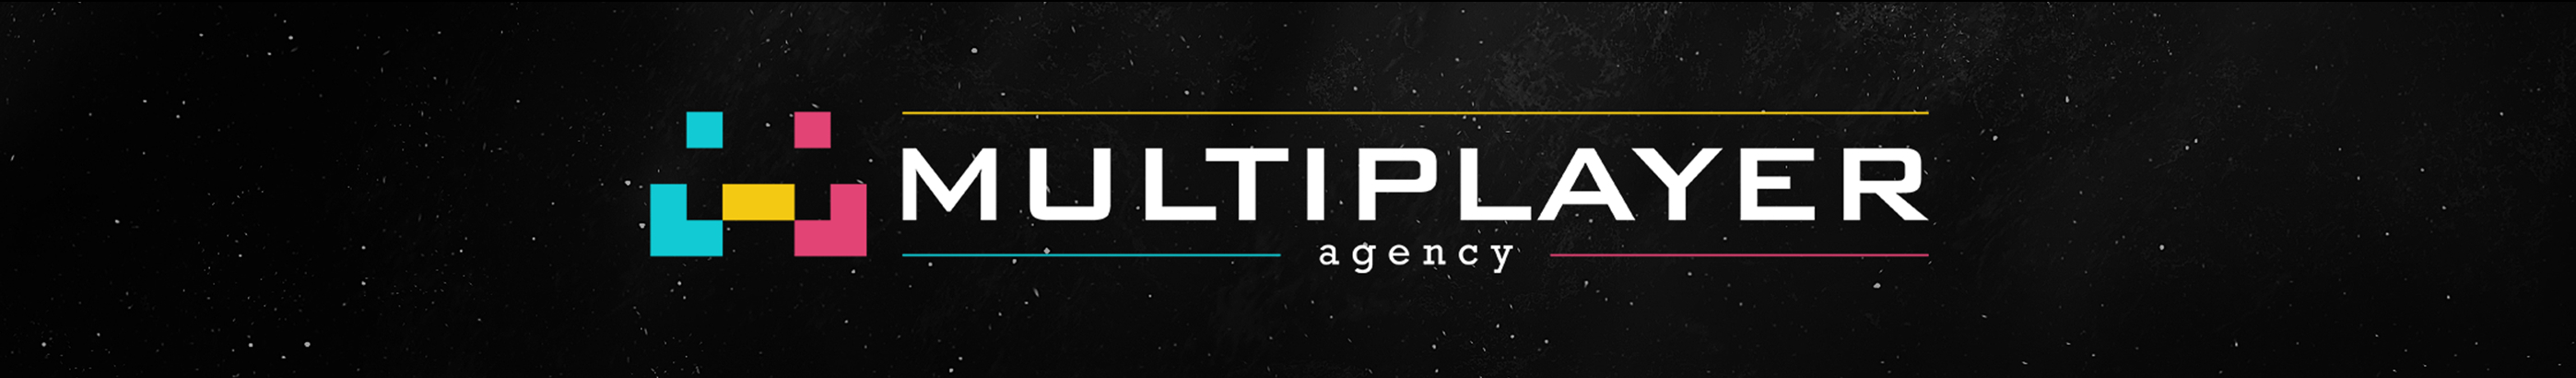 Multiplayer Agency's profile banner